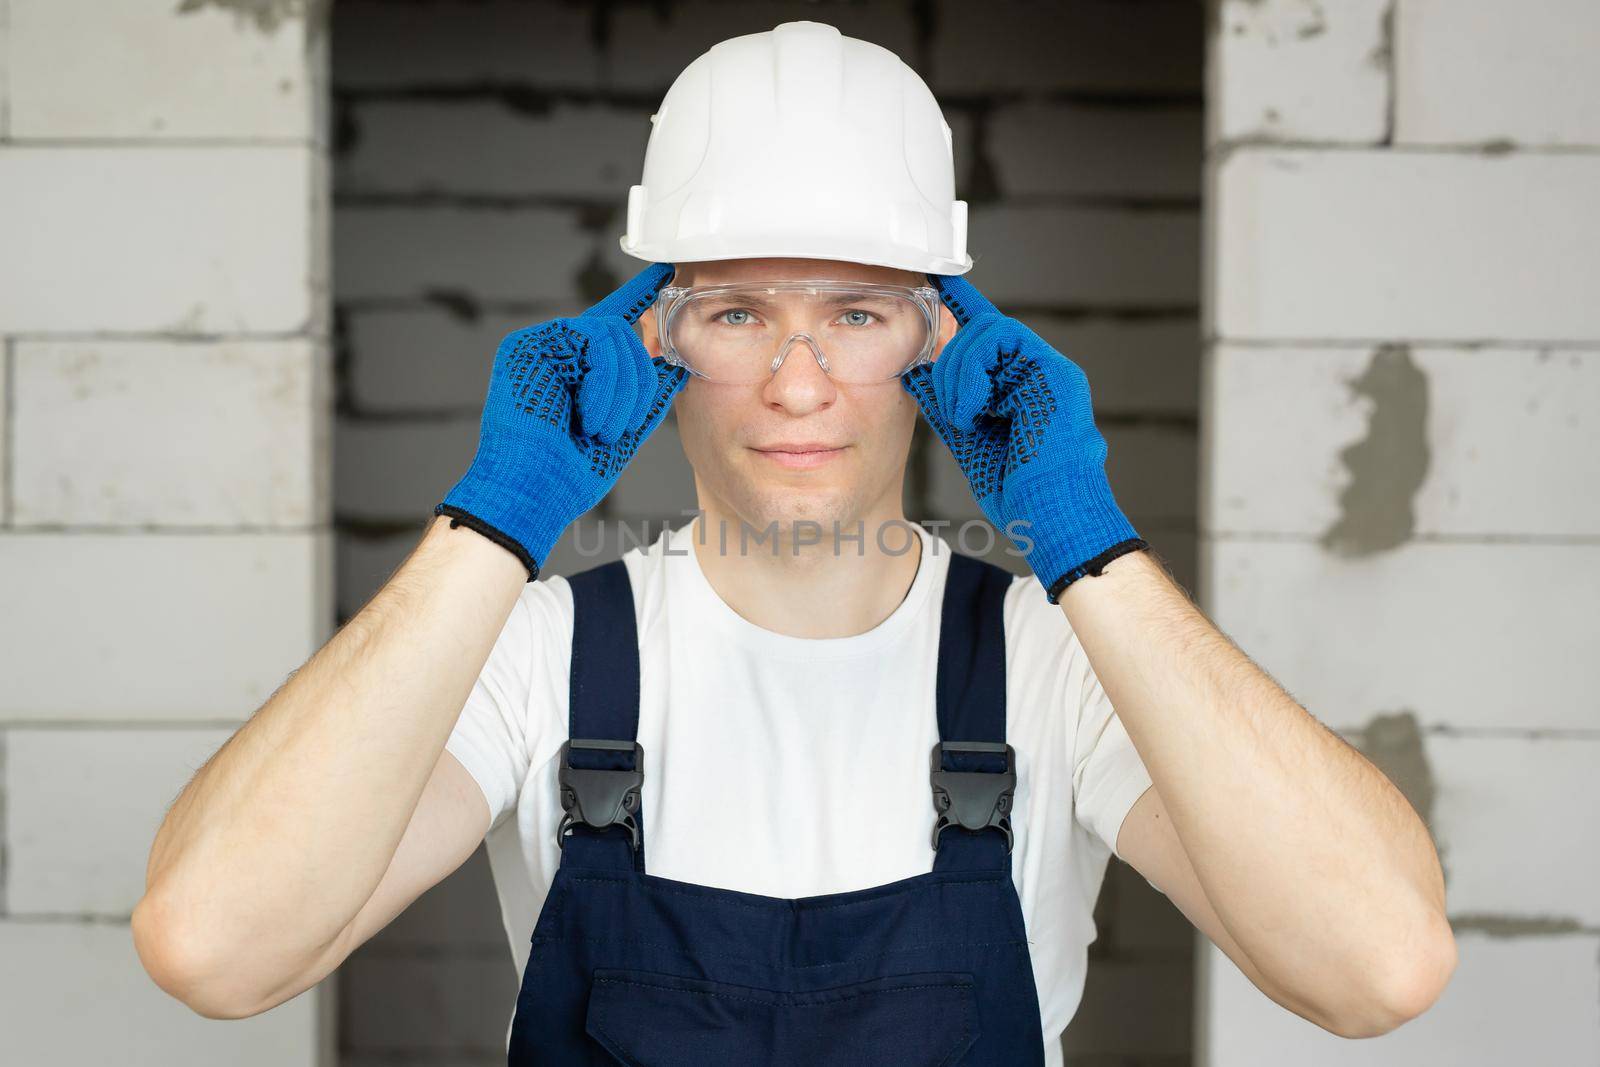 Handyman in a white T-shirt, a combination jacket and a hard hat puts on safety glasses by StudioPeace